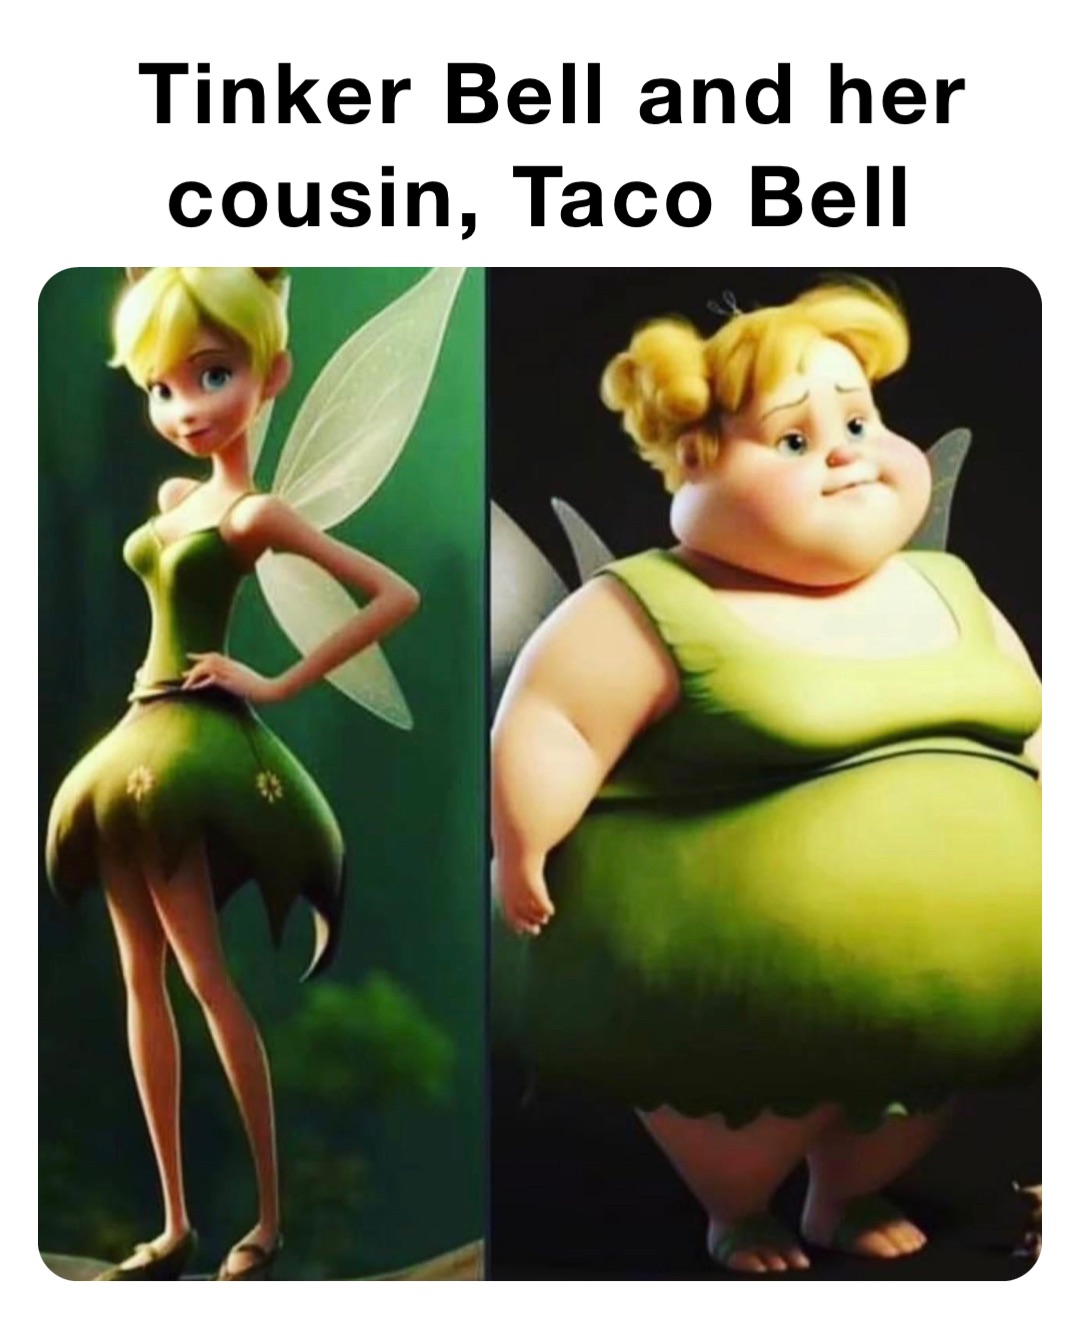 Tinker Bell and her cousin, Taco Bell